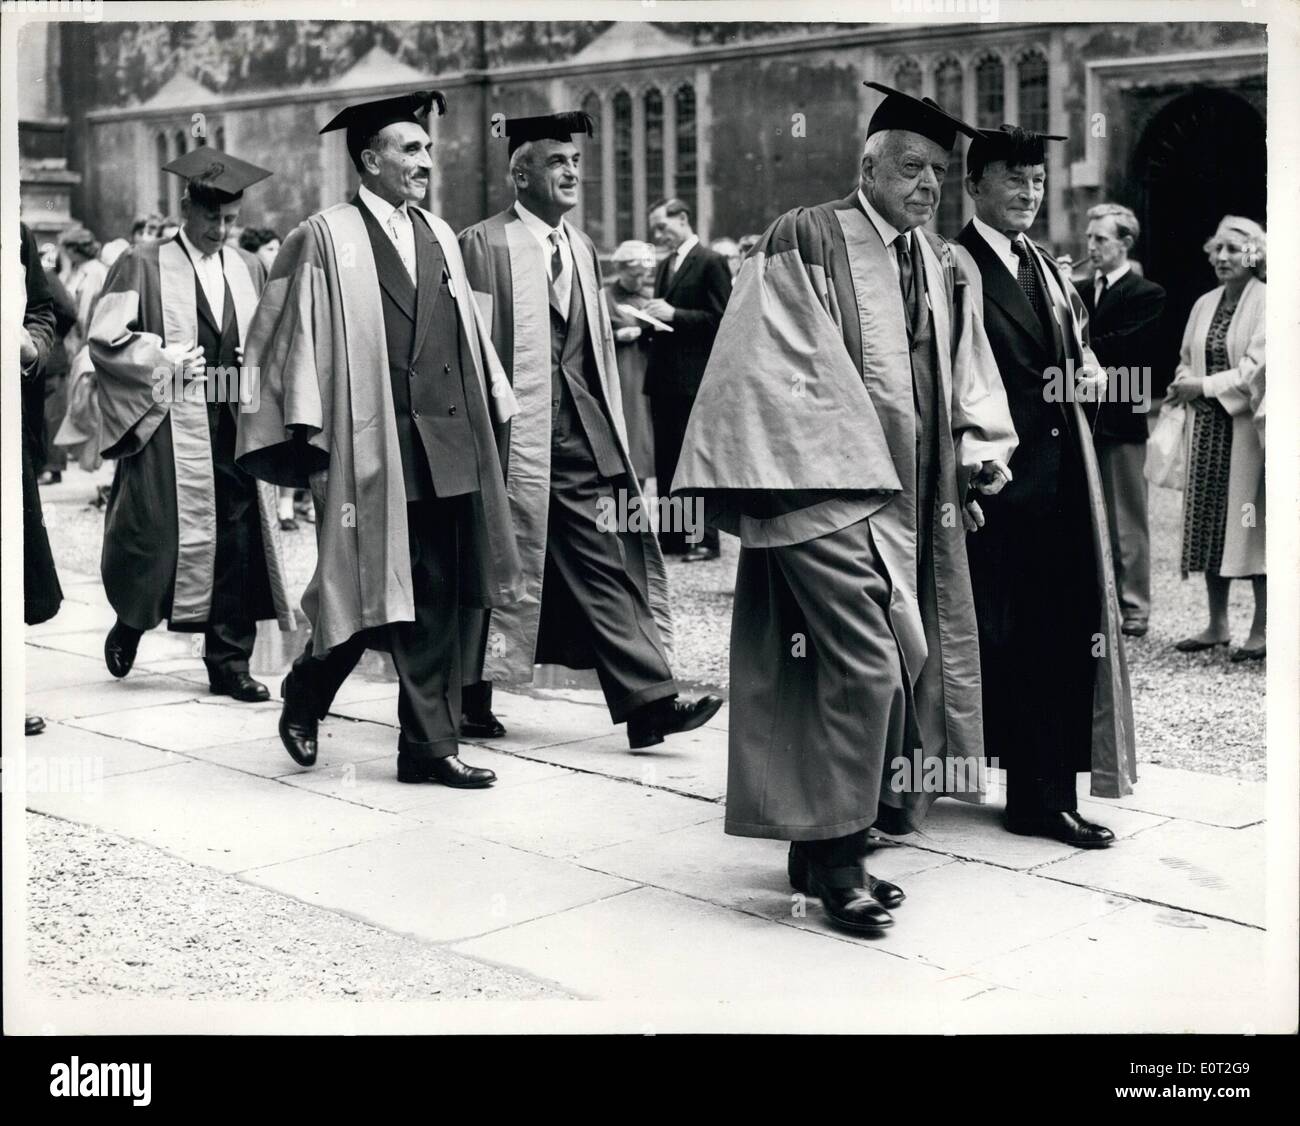 Jul. 21, 1960 - 21-7-60 Degree day for Scientists at Oxford University. To commemorate the Tercentenary of the Royal Society, the University of Oxford today conferred Honorary Doctorates of Science on certain participants in the celebration. Photo Shows: Walking in procession at Oxford University are the five scientists who received Honorary Degrees today. They are (R to L) Dr. Alfred Newton Richards, University of Pennsylvania, U.S.A. (Nearest camera), Professor Nikolai Nikolaevich Semenov, Member of the Praesidium of the Academy of Sciences of the U.S.S.R Stock Photo